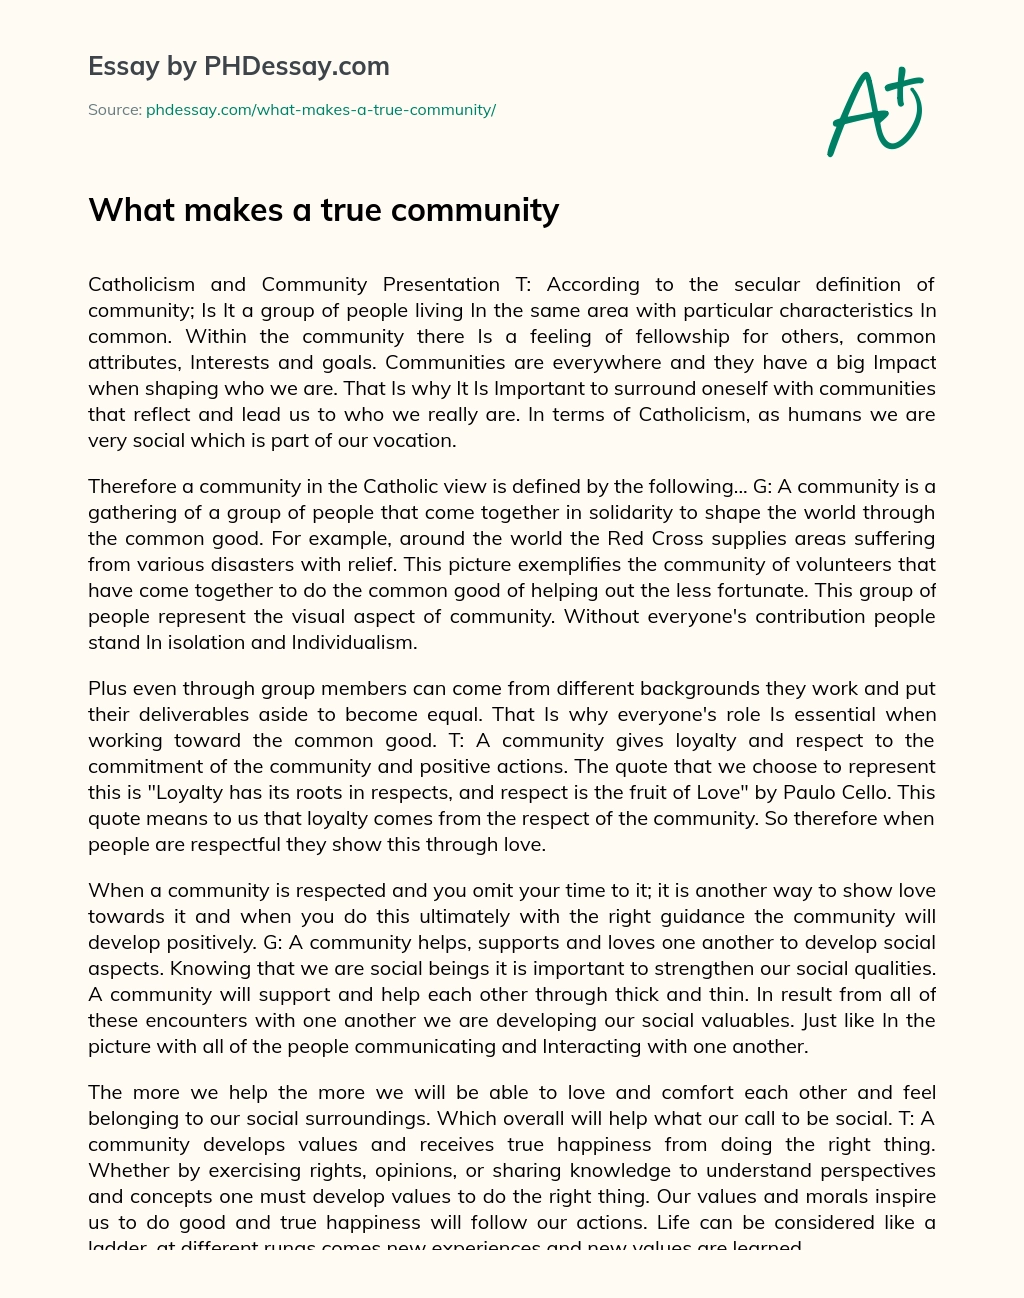 What makes a true community essay